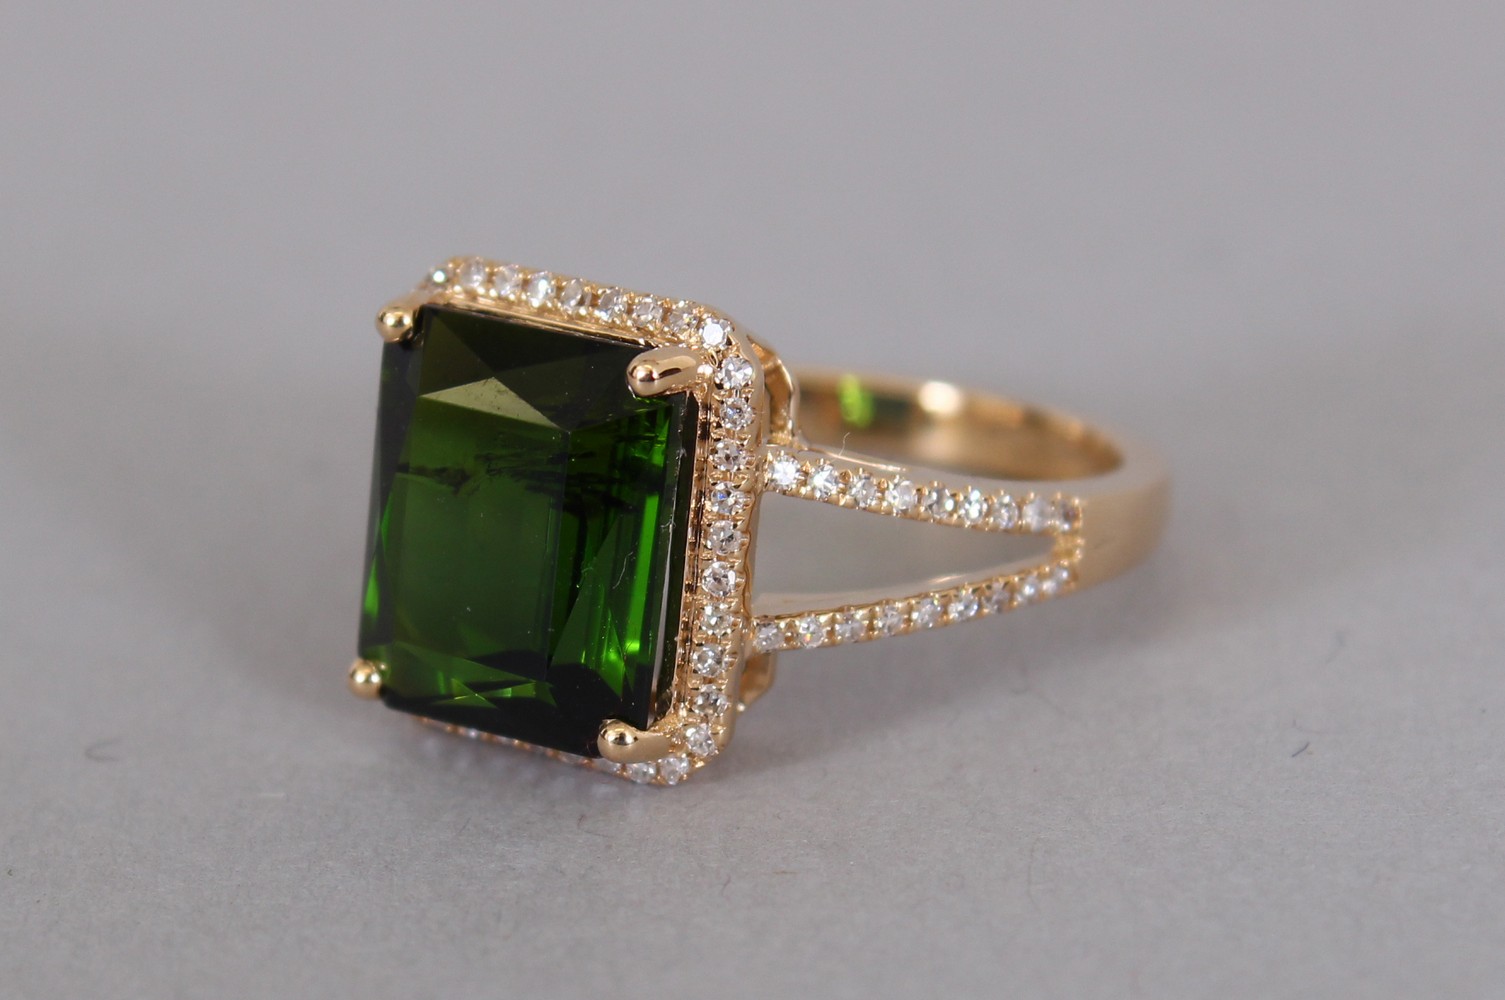 A 14CT YELLOW GOLD AND DIAMOND RING set with an emerald cut green tourmaline approx. 5.19cts. - Image 2 of 3